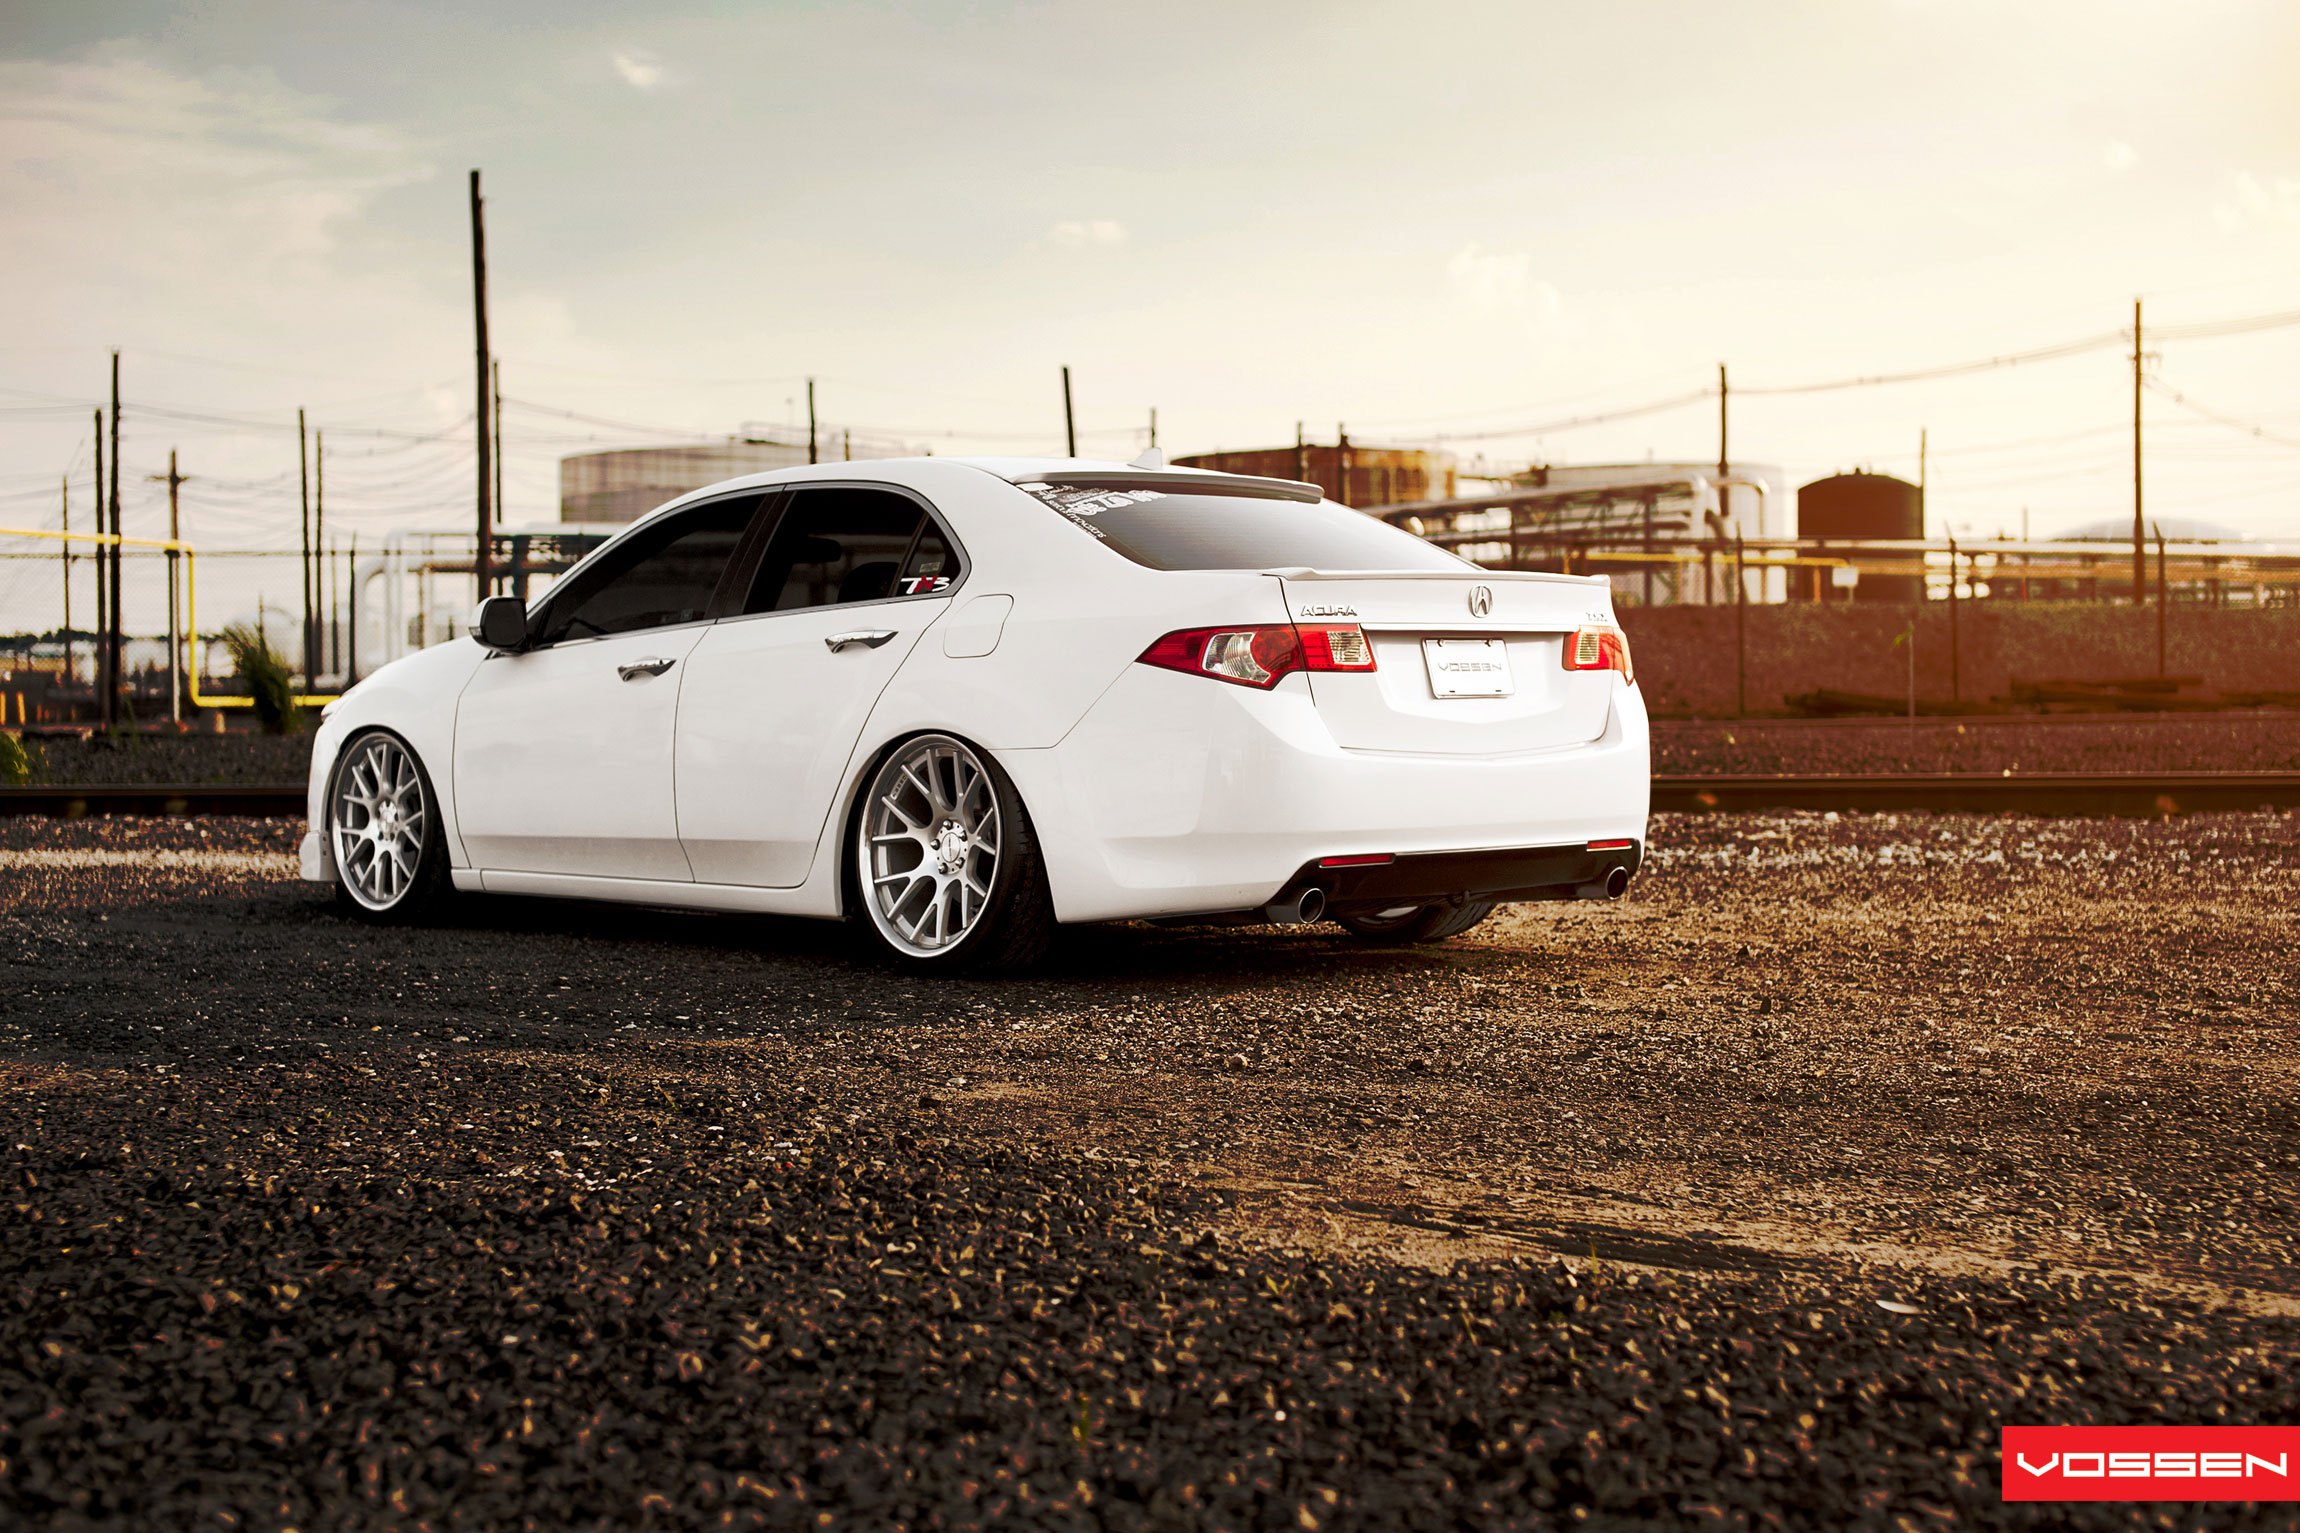 Rear Diffuser with Single Exhaust Tips on Acura TSX - Photo by Vossen